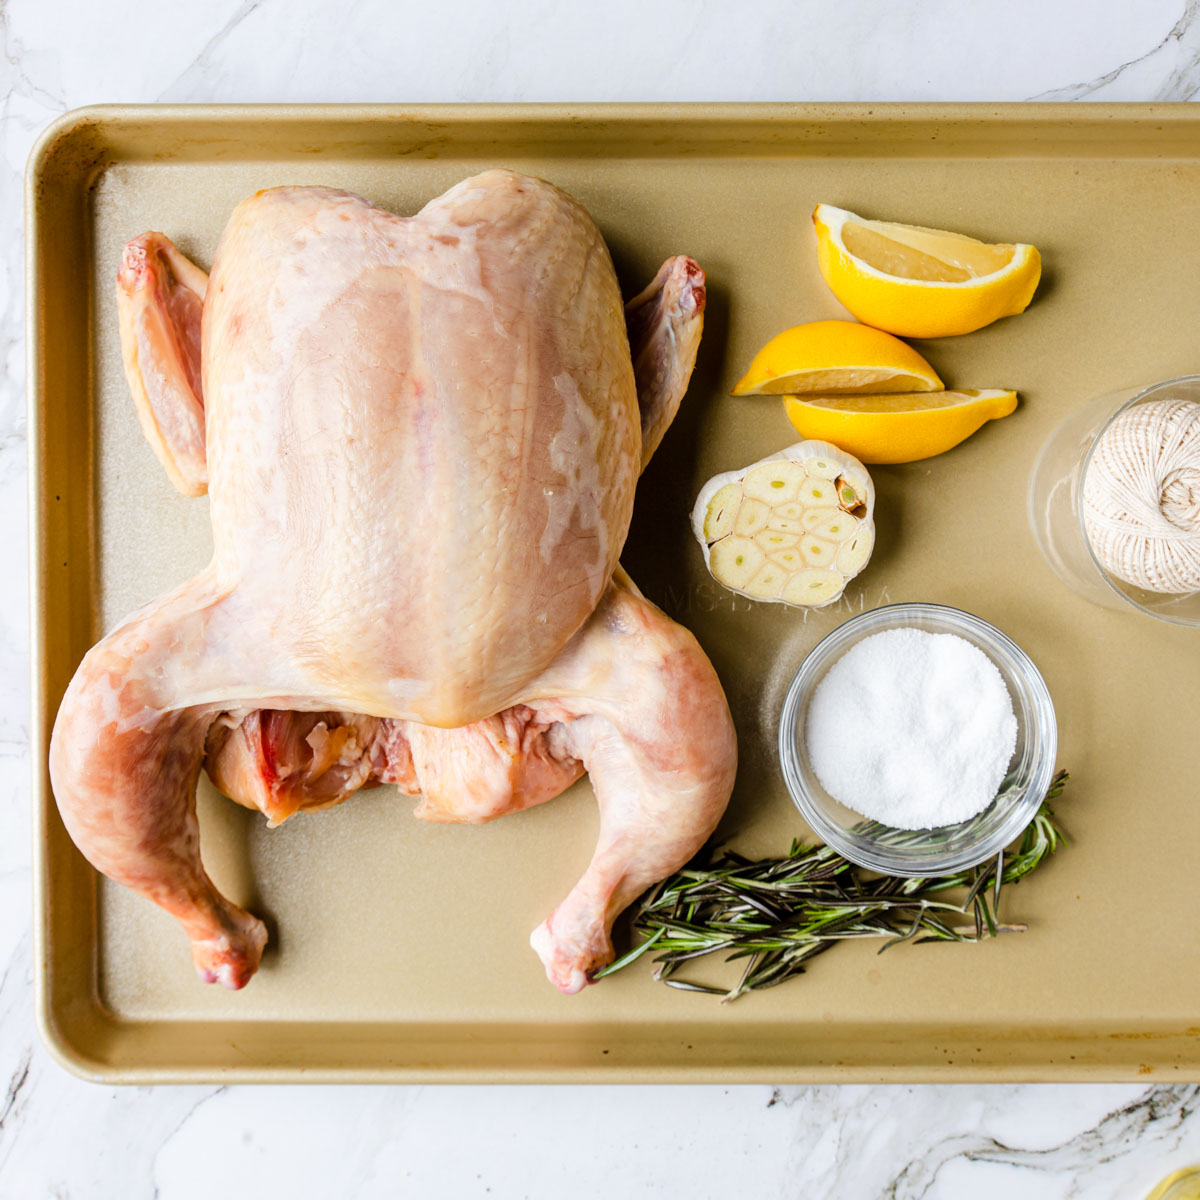 herbs and aromatics to stuff in your chicken before roasting